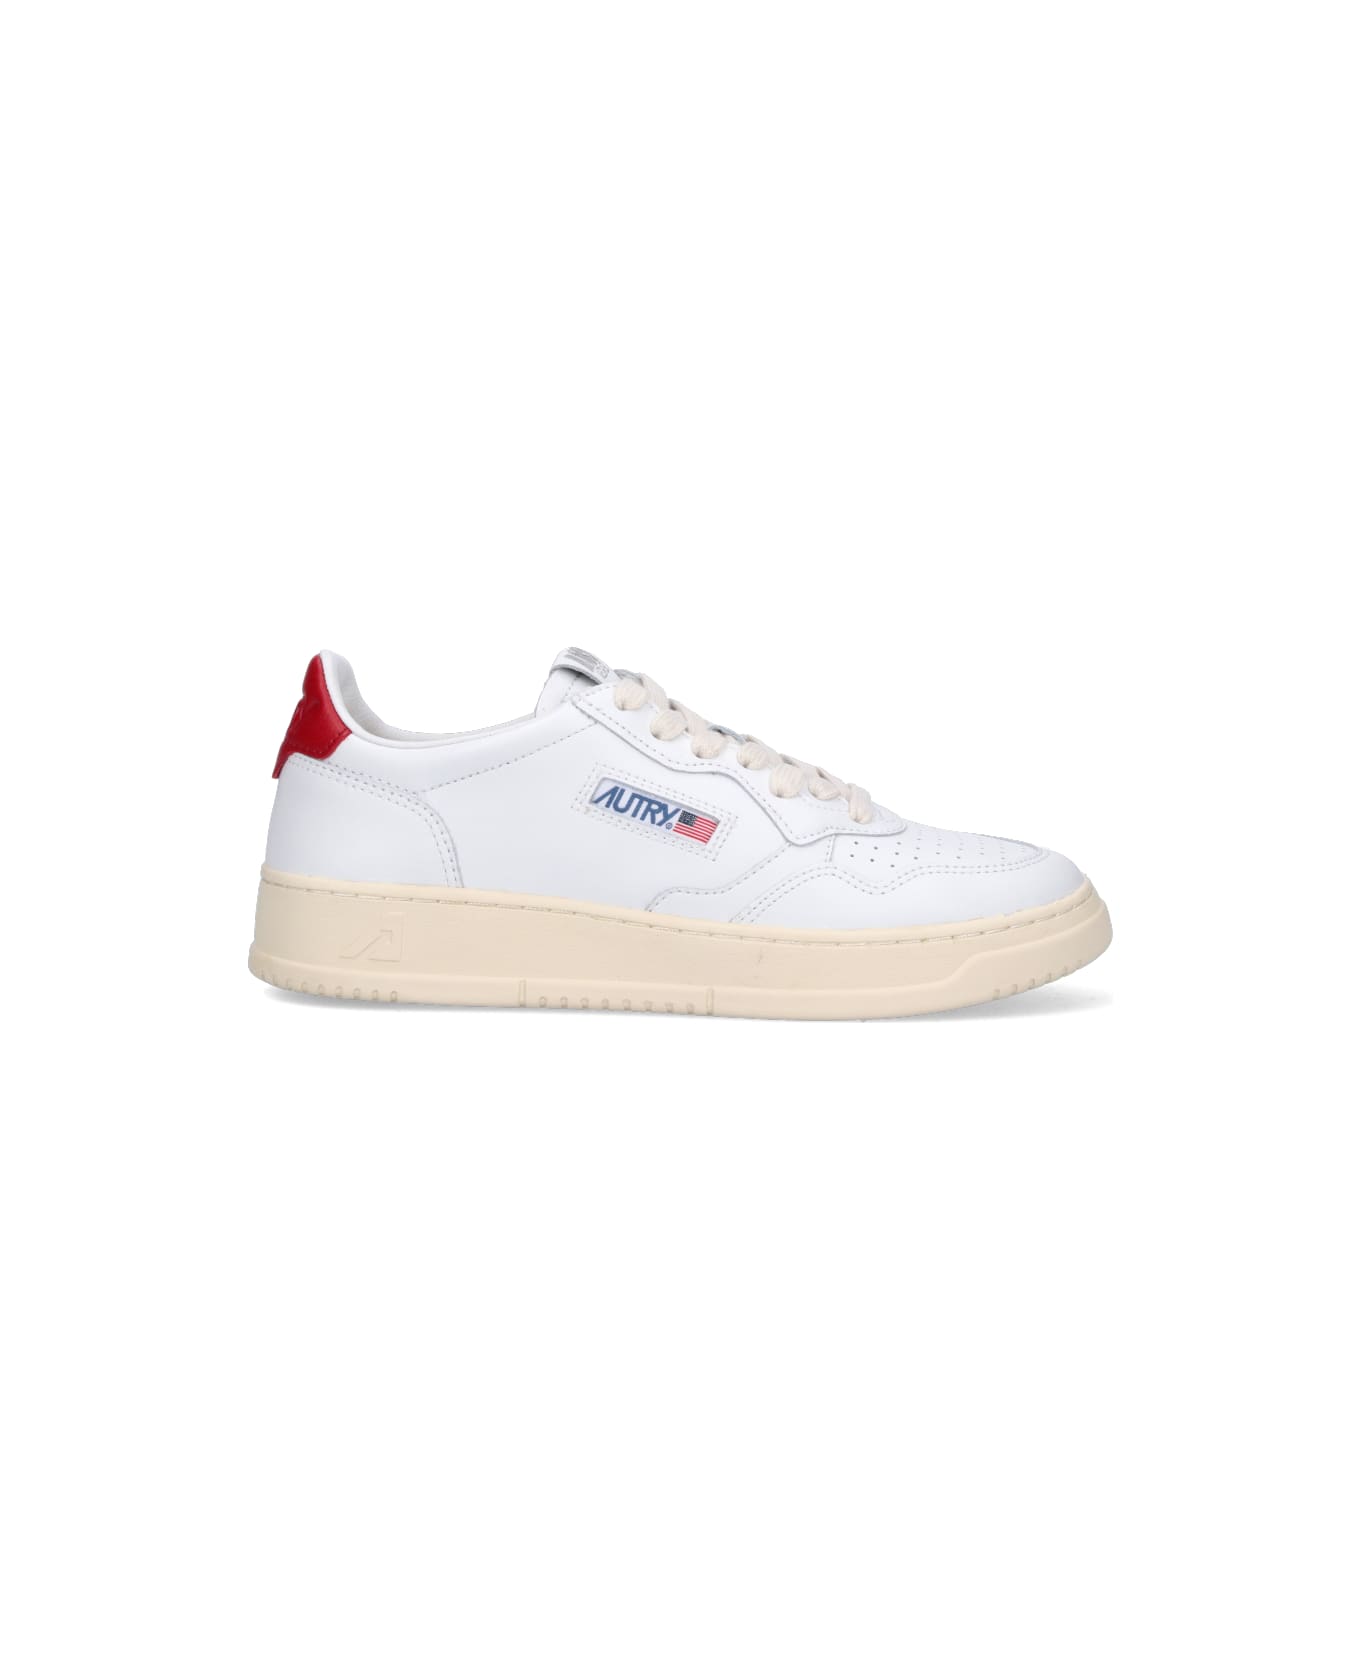 Autry Low Sneakers 'medalist' - White Red スニーカー